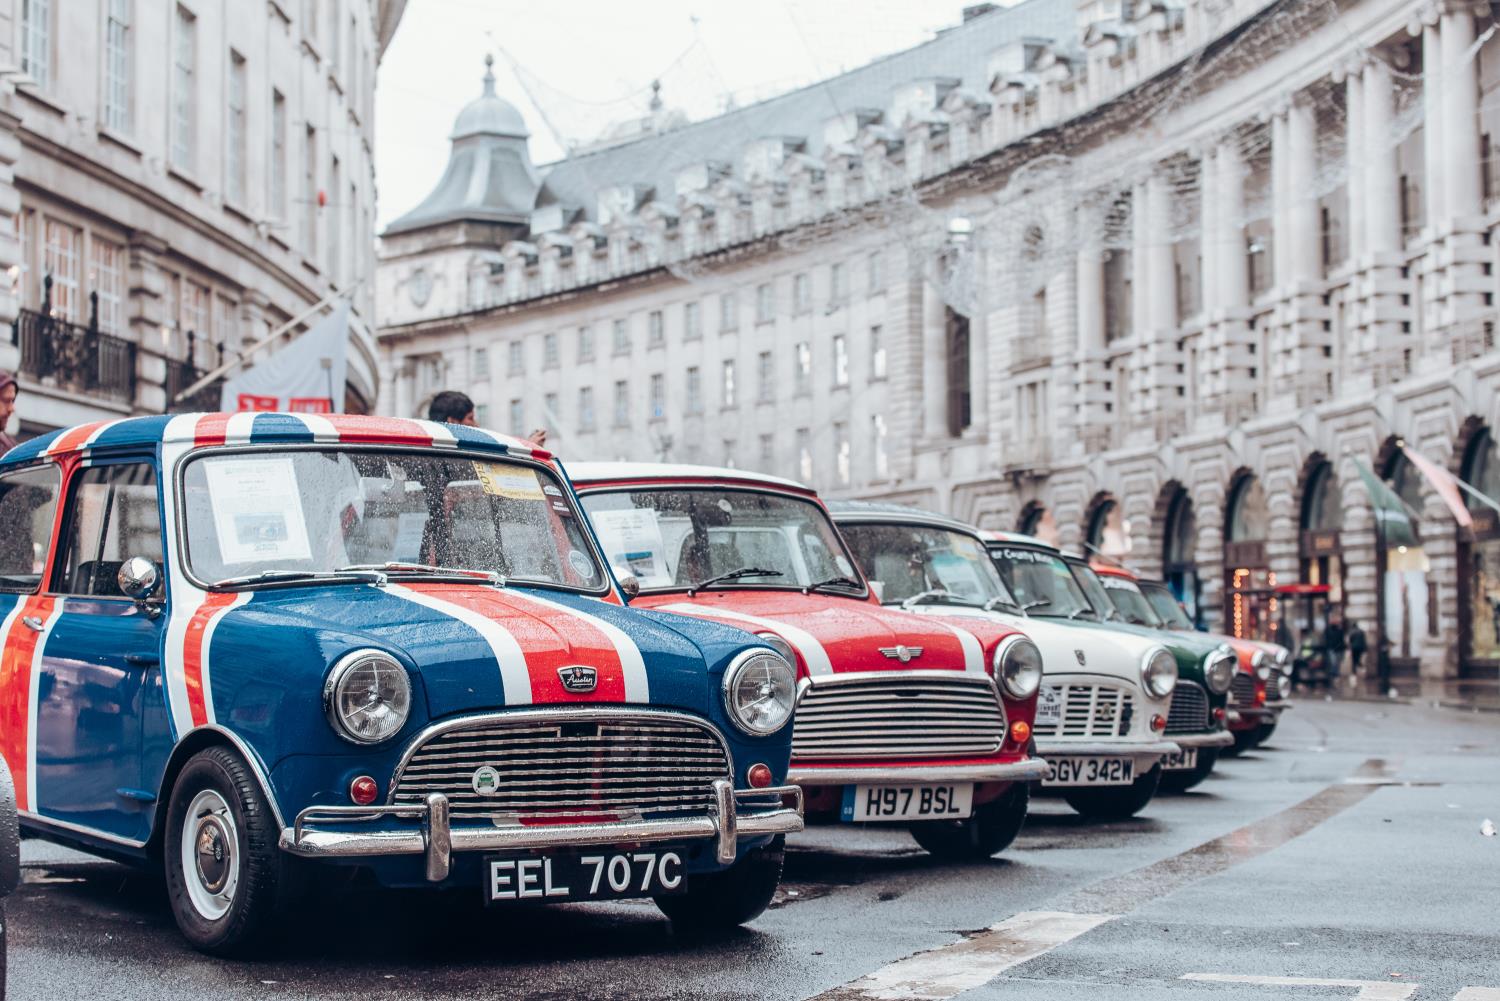 The Regent Street Motor Show is a free-to-attend open-air event